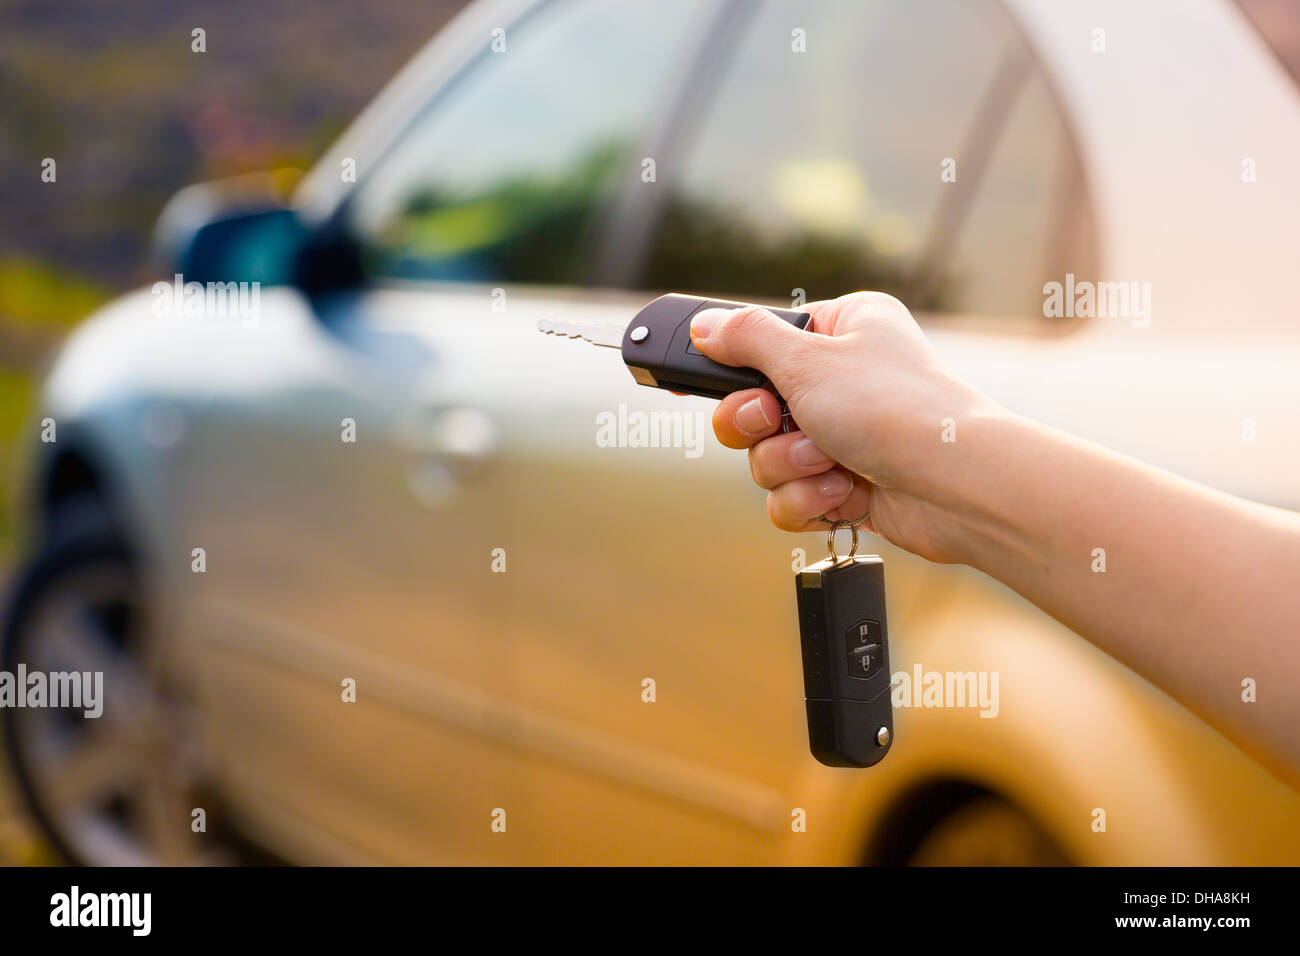 women's hand presses on the remote control car alarm systems Stock Photo